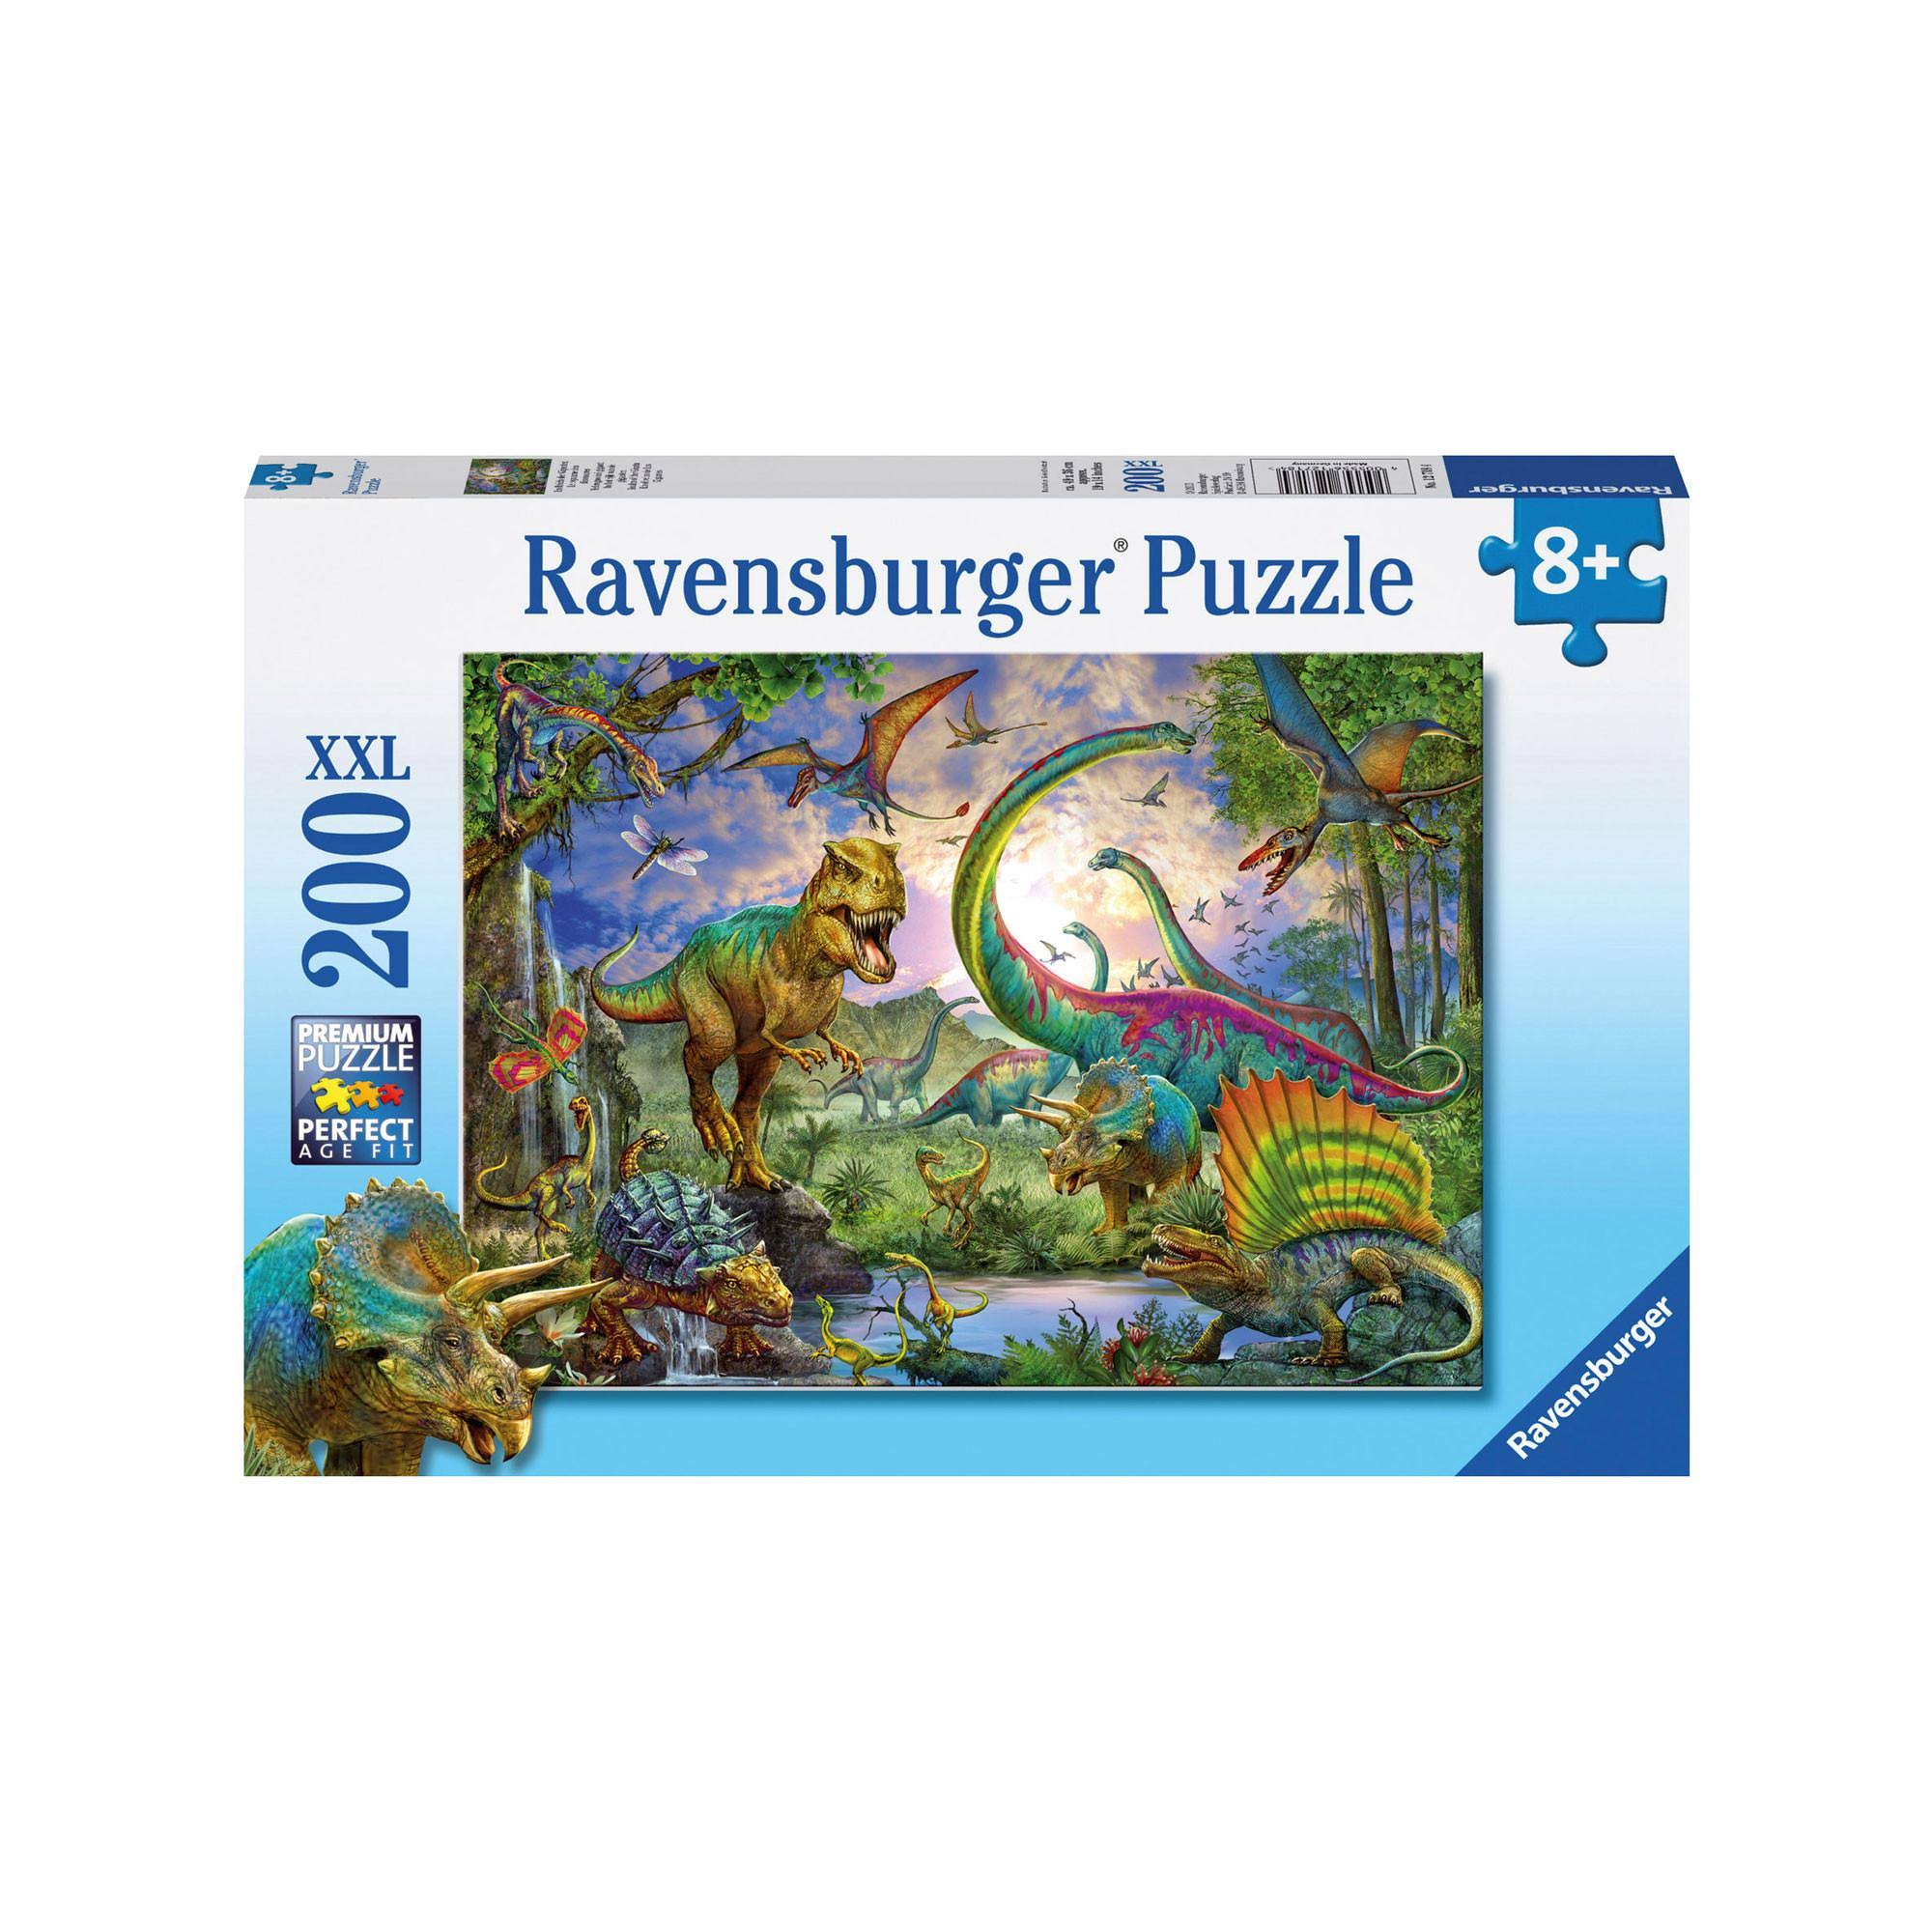 Ravensburger Puzzle Realm of the Giants - 200 Pieces